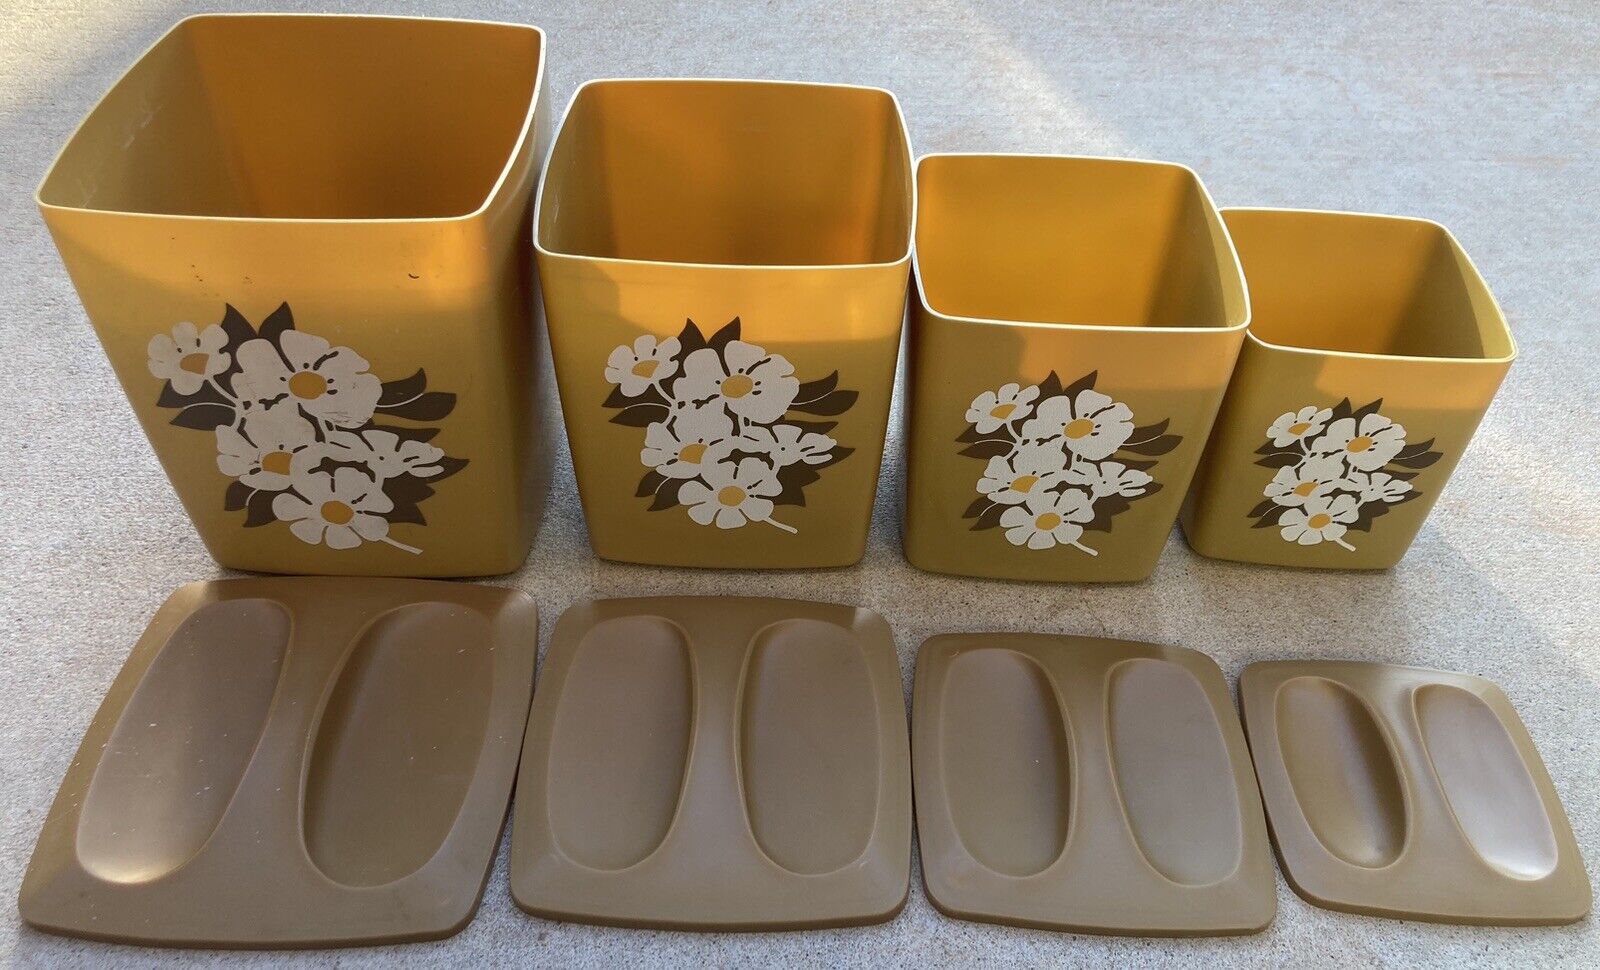 70s Vtg Gold White Flowers Floral Plastic Nesting. Set of 4 Canisters w/ Lids